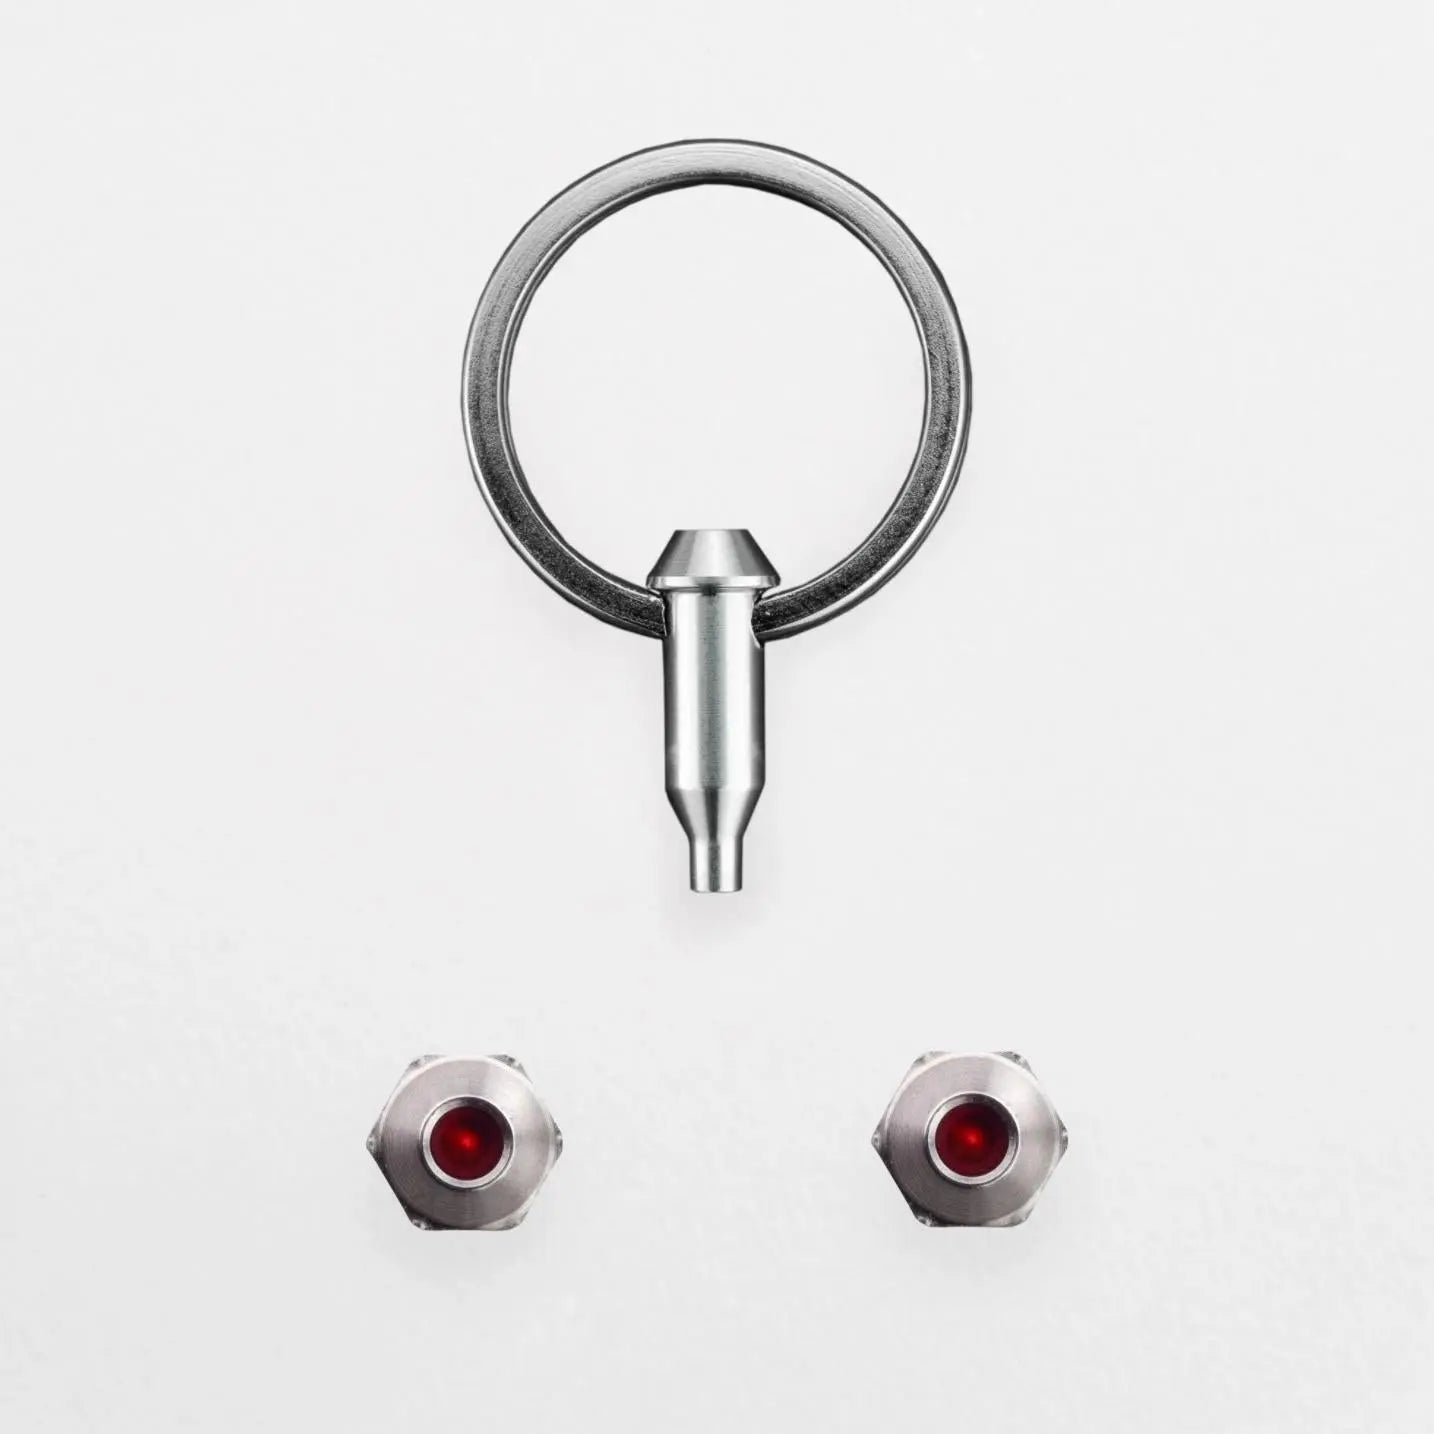 Hexlox Security Bolt Sets for Wabi Bicycles and Wheels - Wabi Cycles